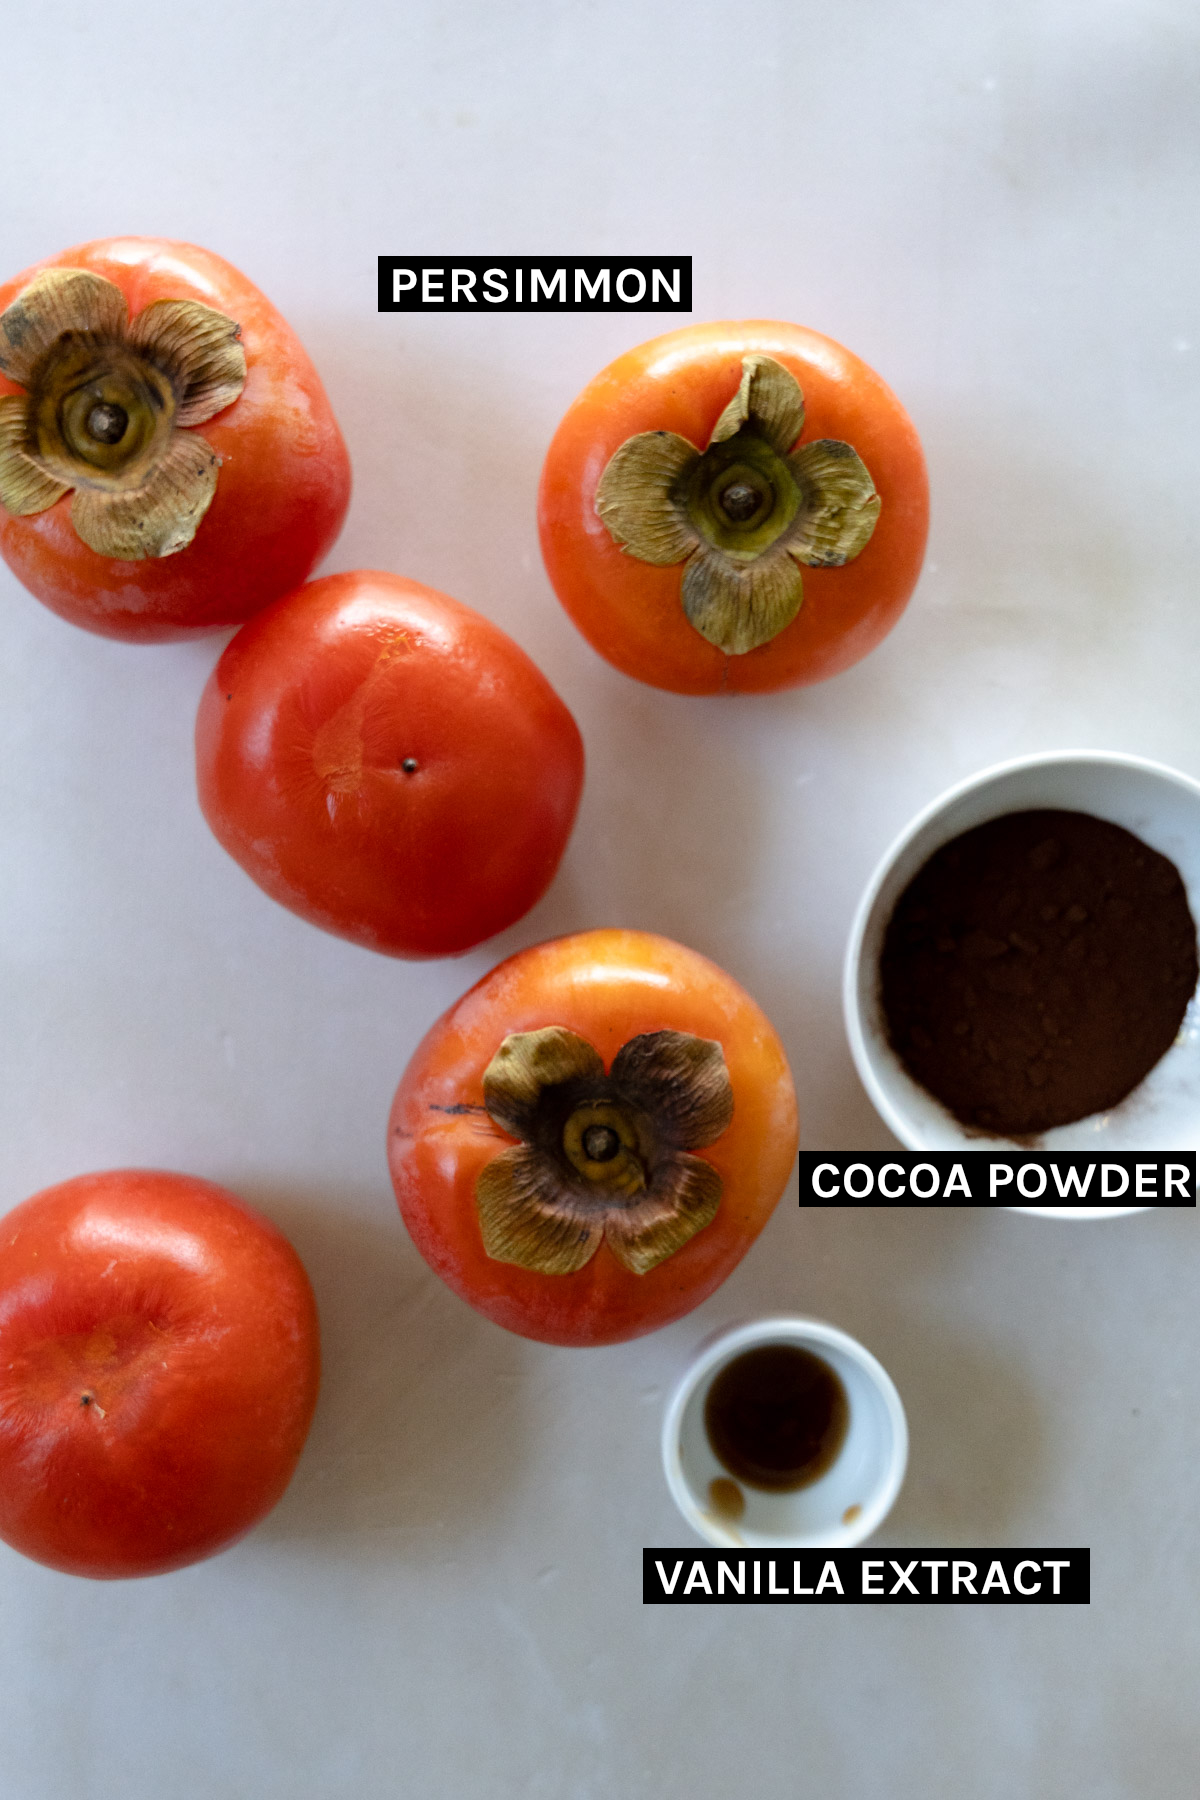 5 persimmons, cocoa powder and vanilla extra in white bowls